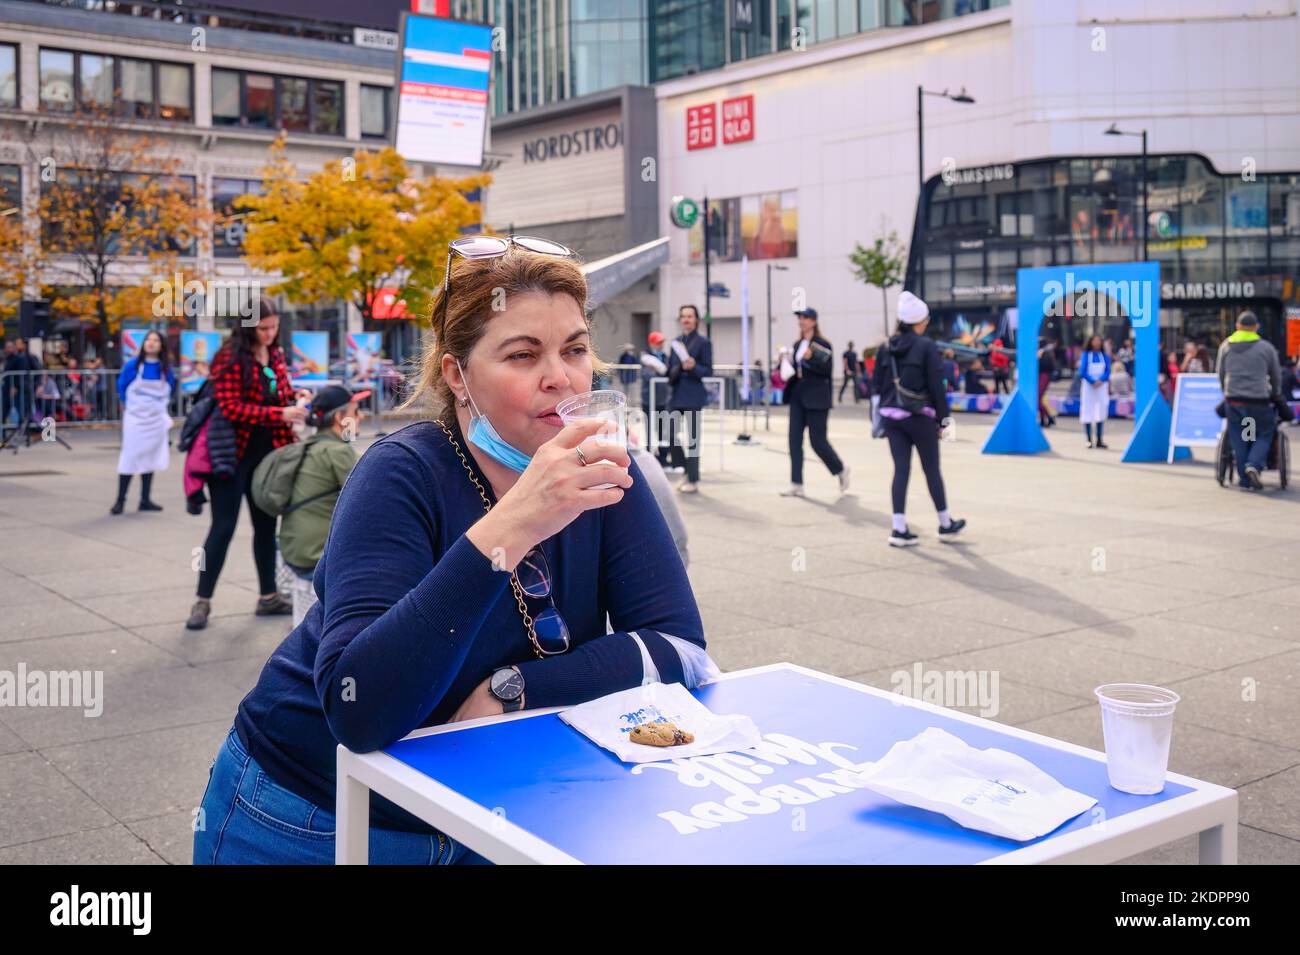 Toronto, Canada - November 5, 2022: Event named Everybody Milk in Yonge-Dundas Square. The event is a campaign by Dairy Farmers of Ontario celebrating Stock Photo